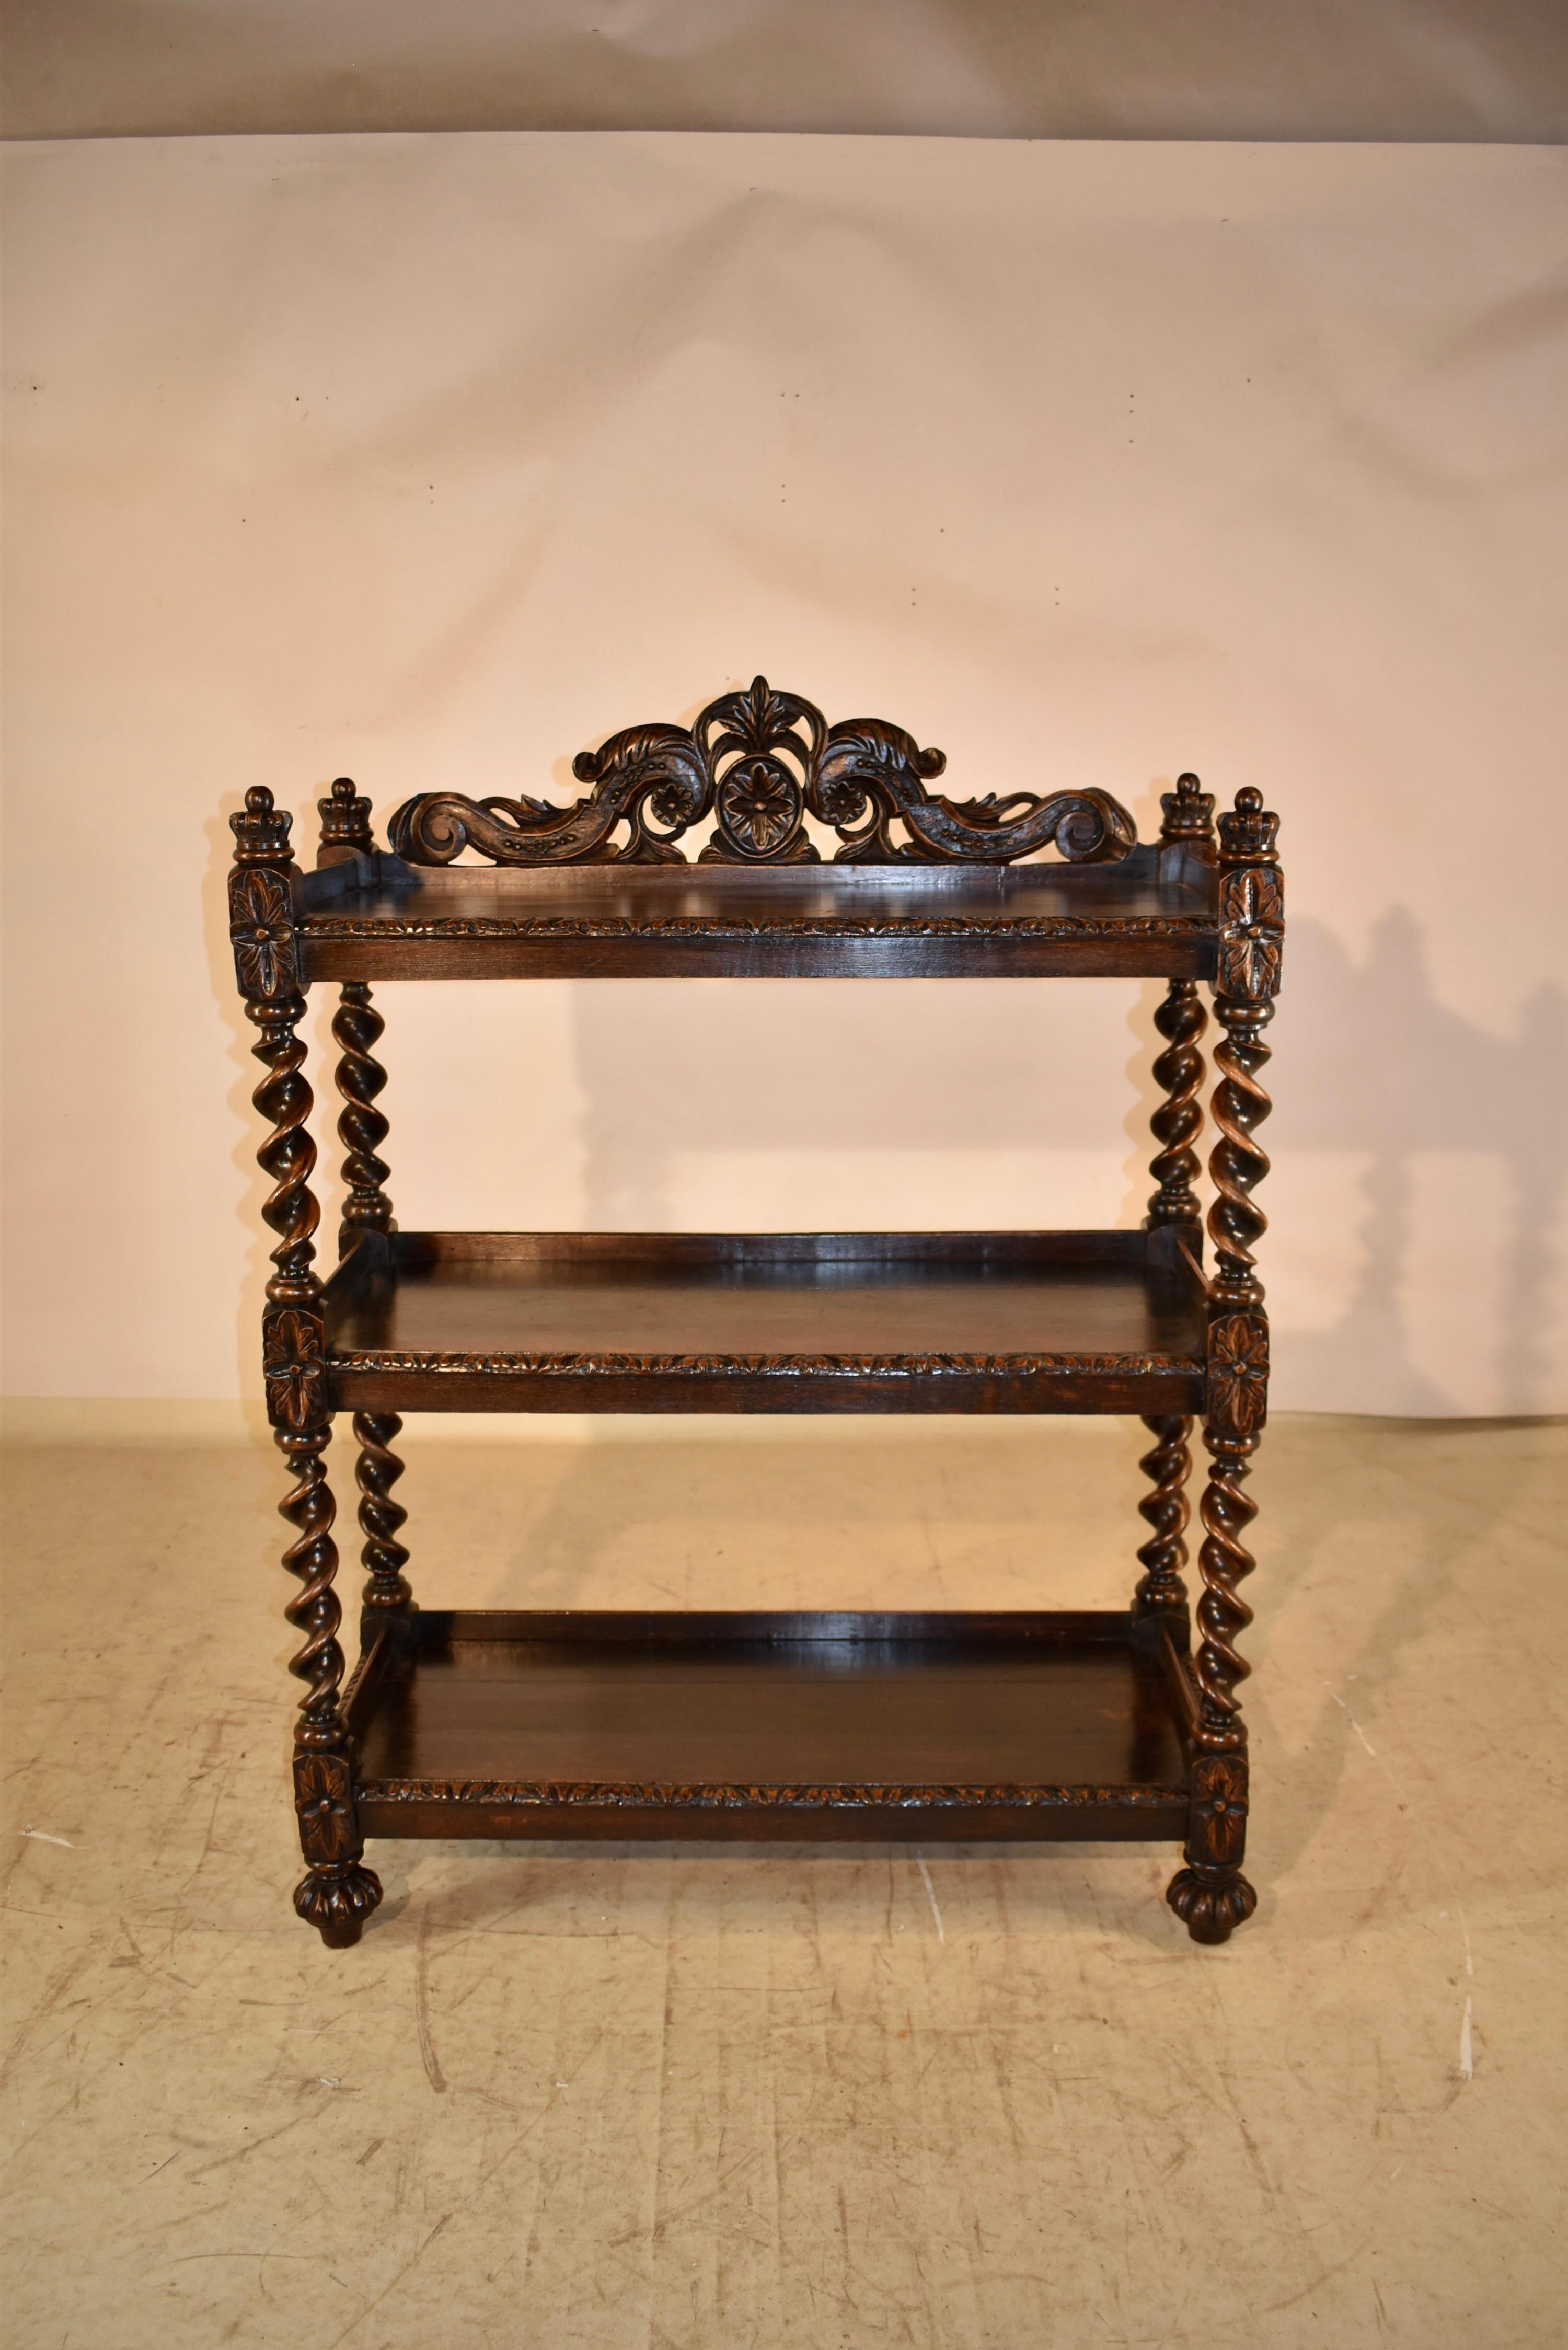 19th century oak dessert buffet from France. On the top there is a glorious hand carved backsplash and four hand carved crown finials. There are three shelves, all with carved front beveled edges, and galleries on three sides. The carved and beveled